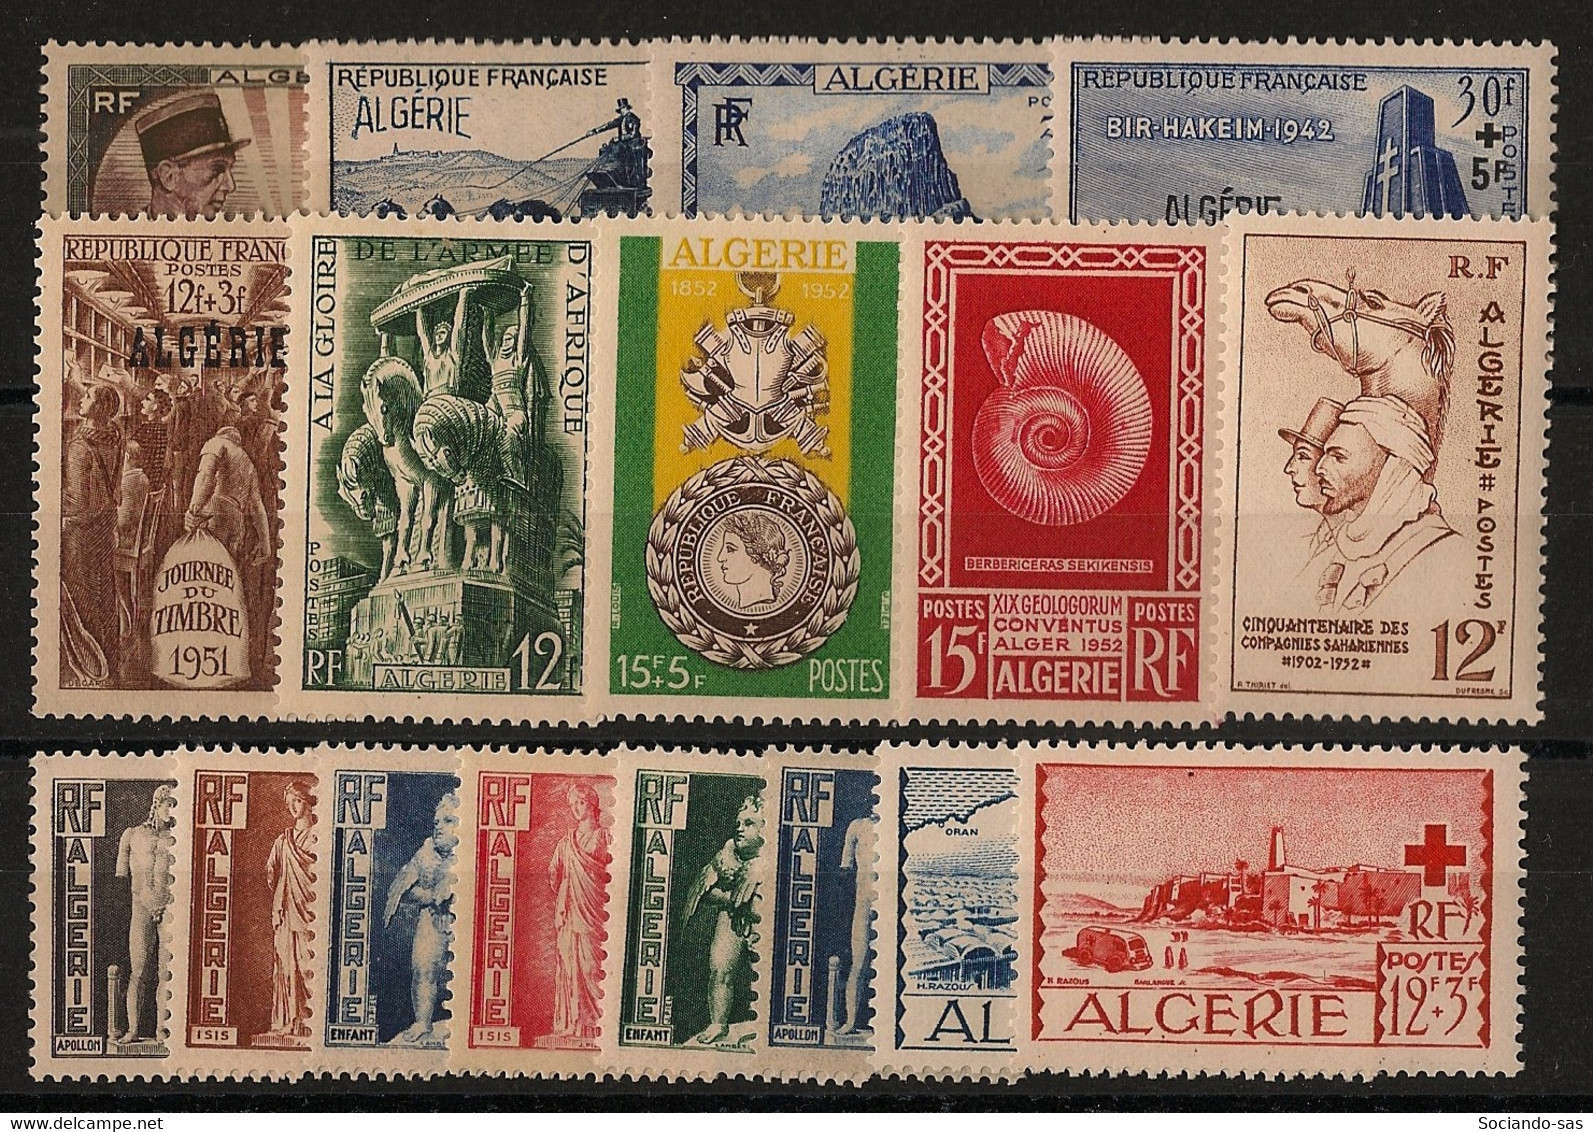 ALGERIE - Année Complète 1951-52 - N°YT. 286 à 302 - Complet - 17 Valeurs - Neuf Luxe ** / MNH / Postfrisch - Full Years